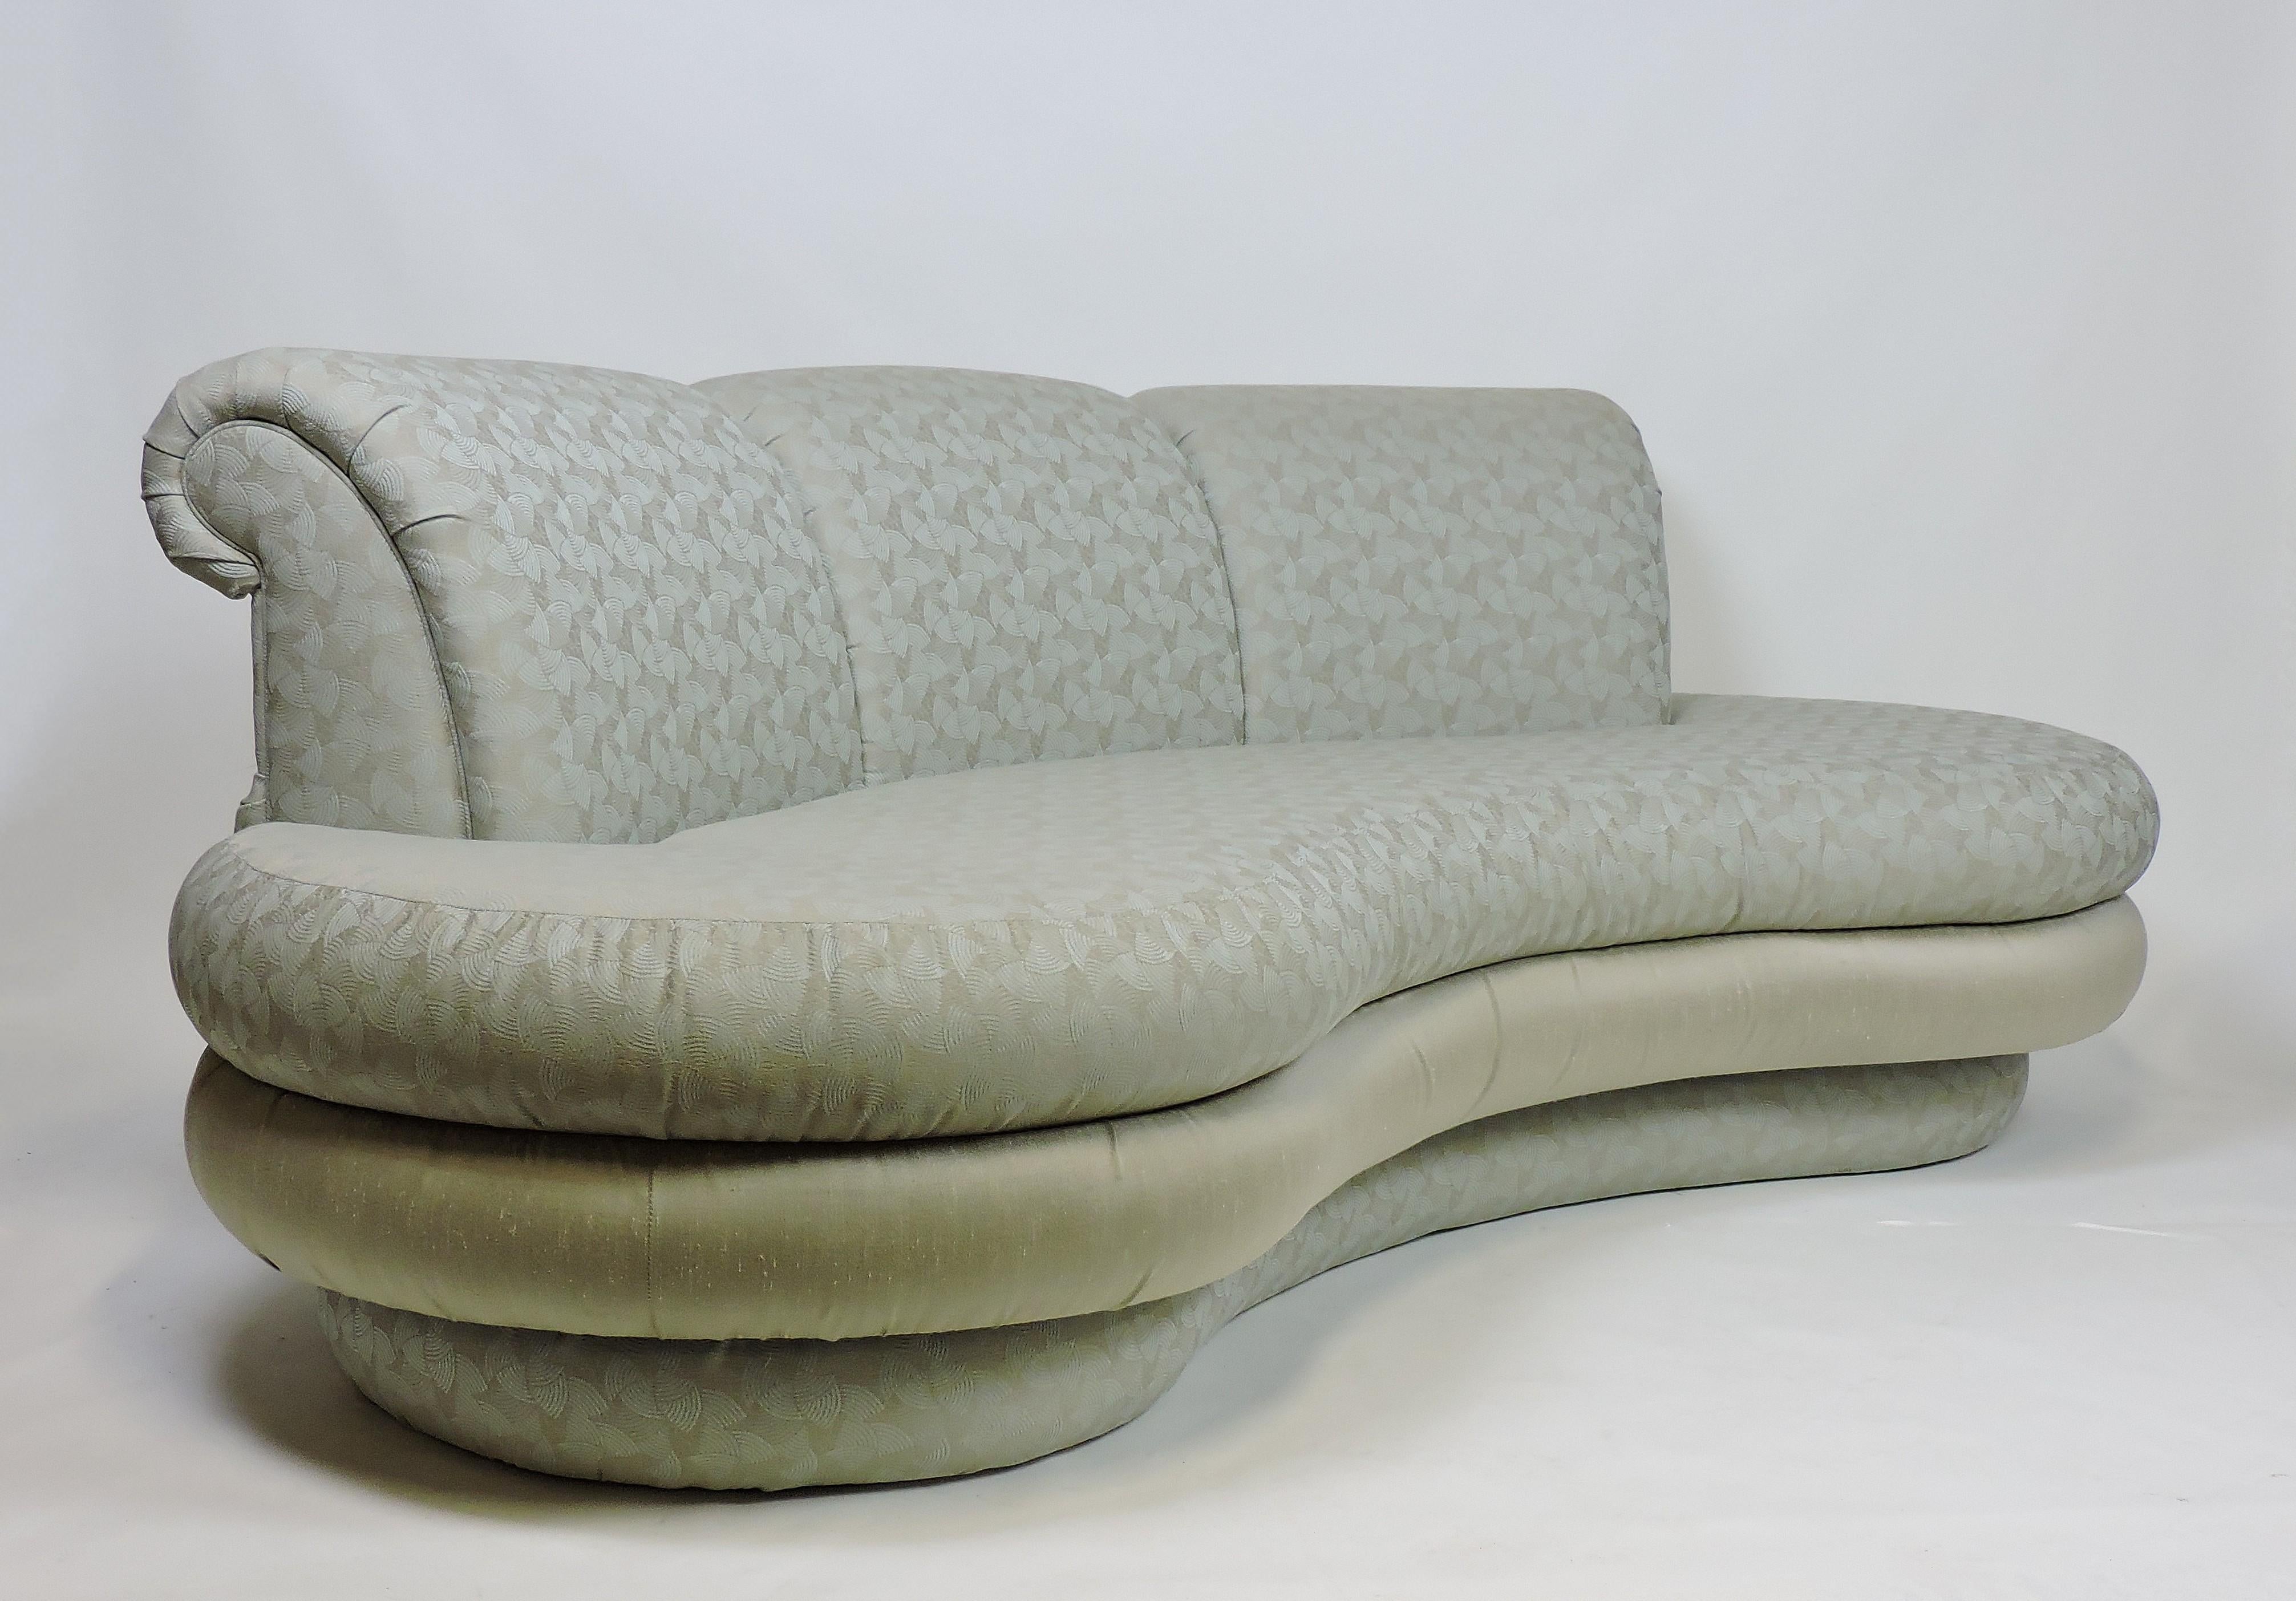 American Pair of Adrian Pearsall Mid-Century Modern Cloud Kidney Shaped Sofas